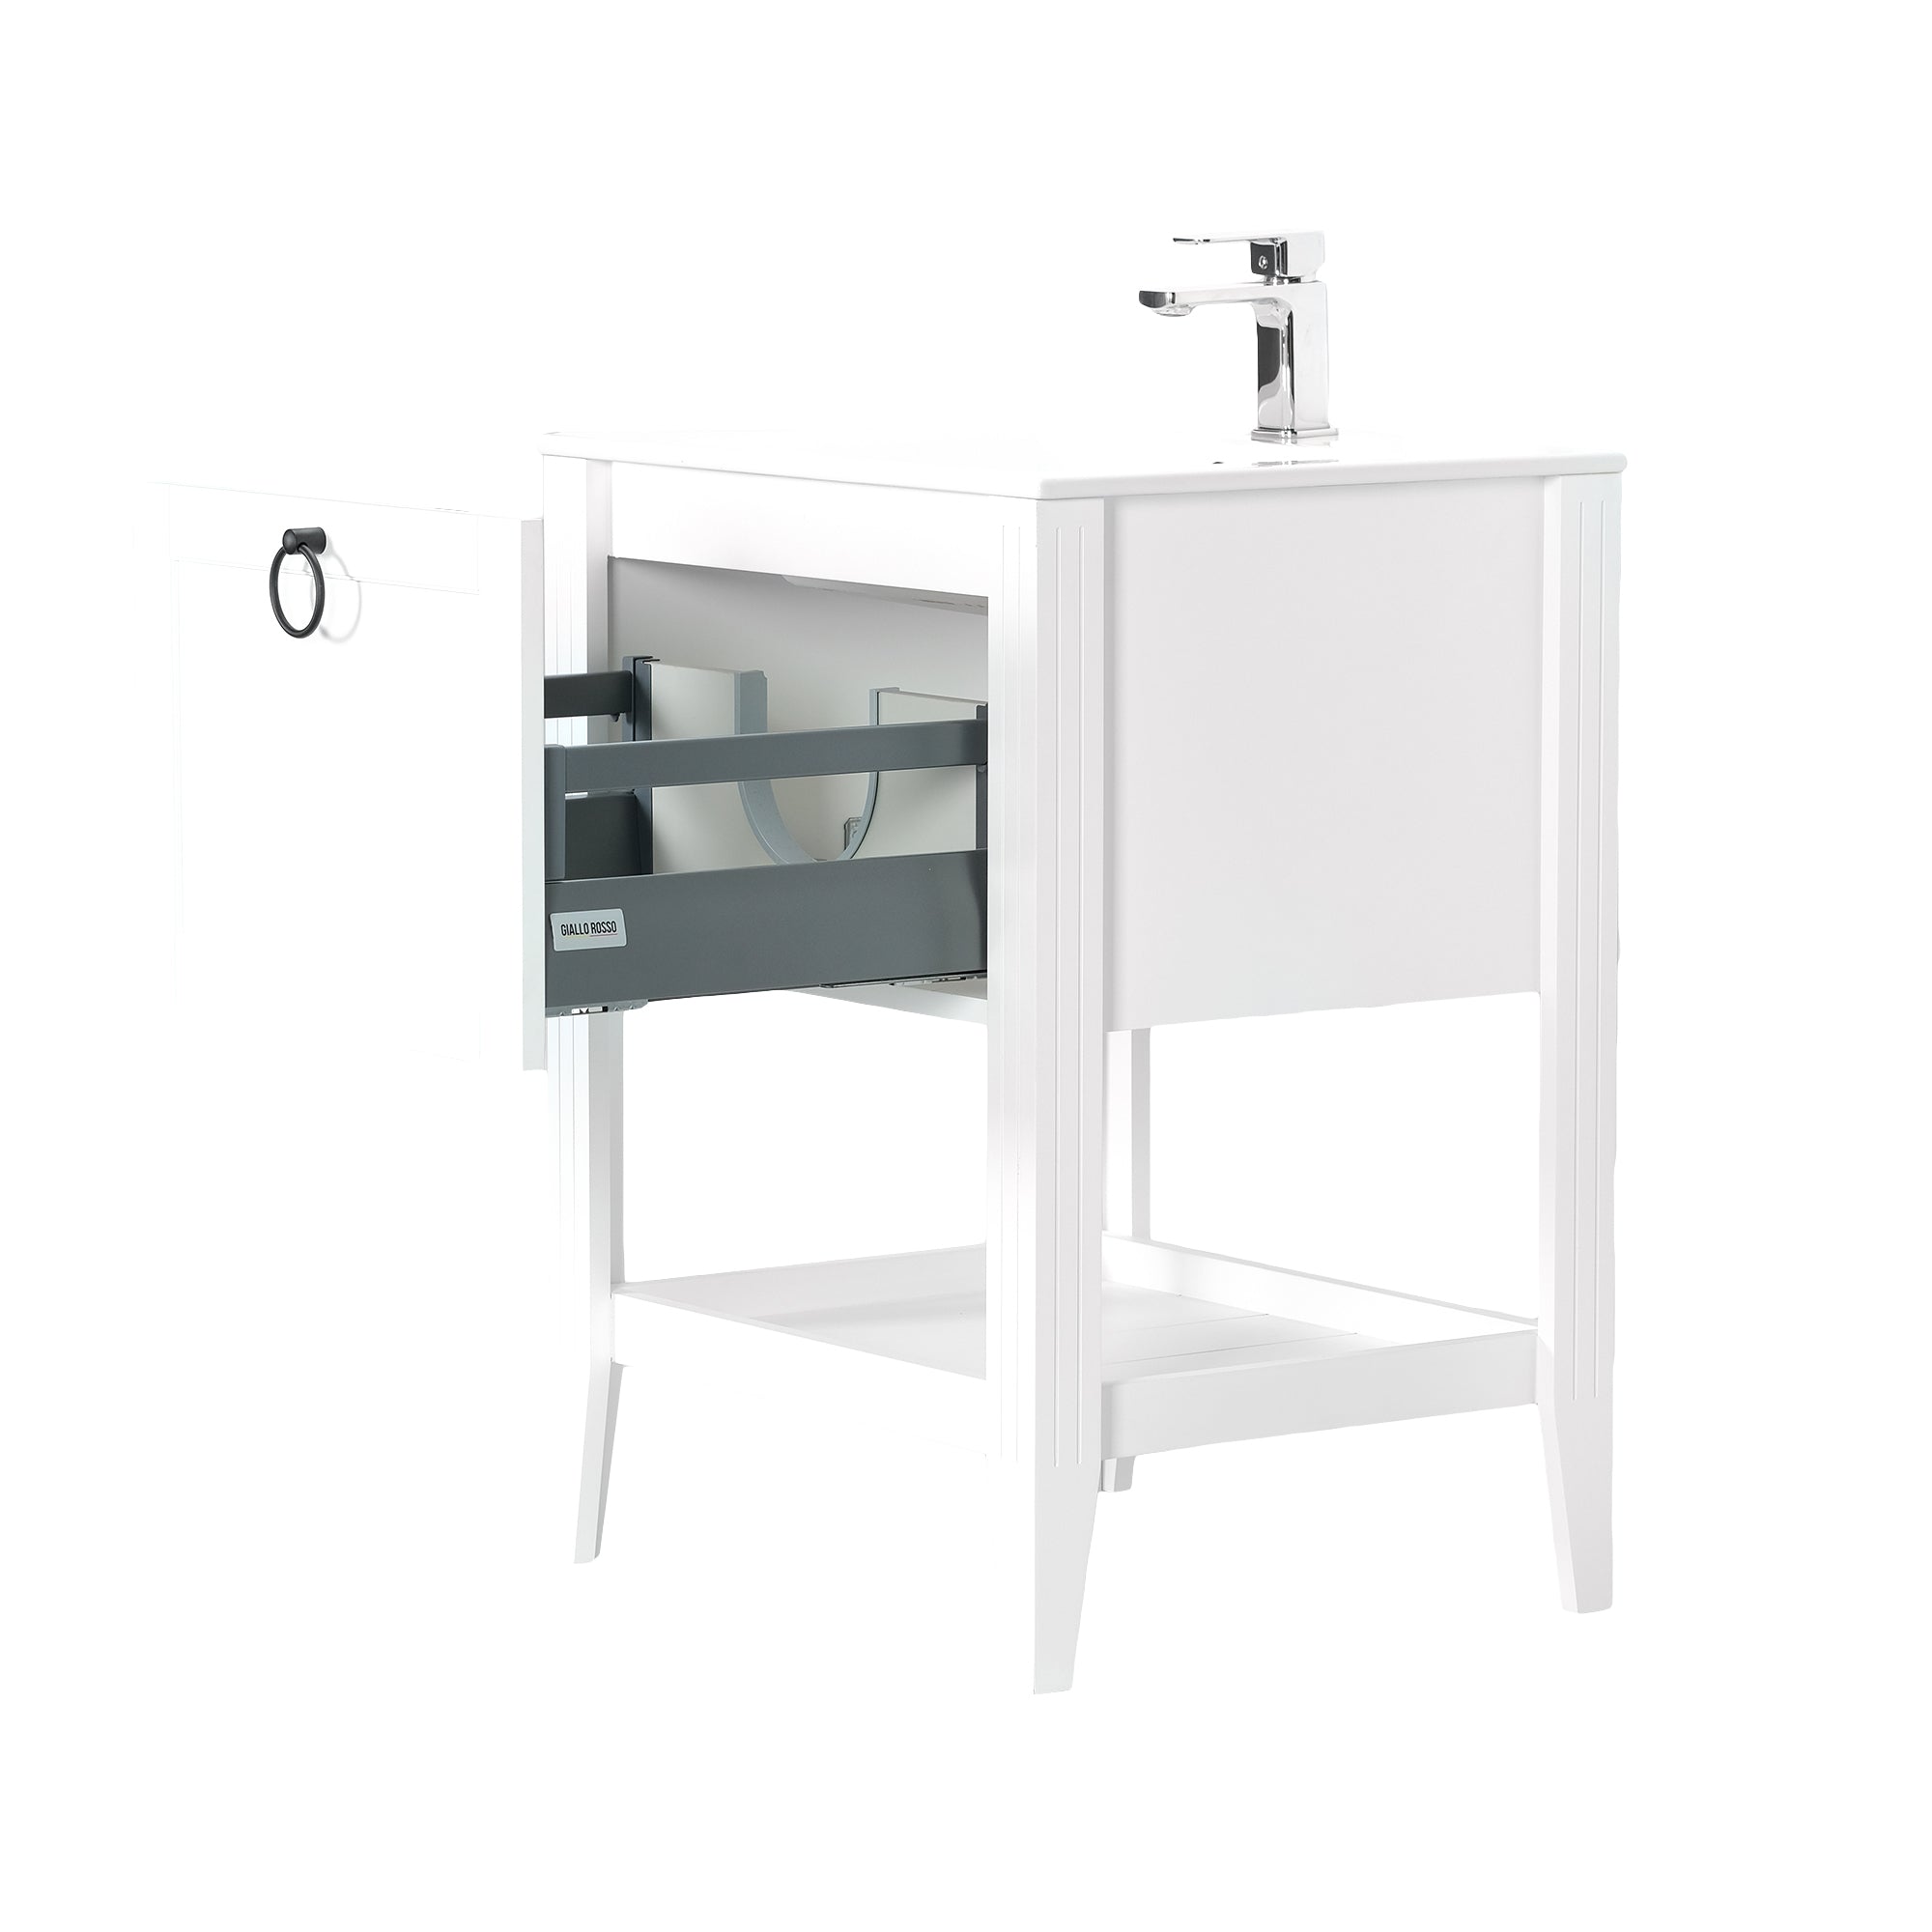 SOFIA 24 INCH FREE STANDING VANITY AND SINK COMBO - WHITE